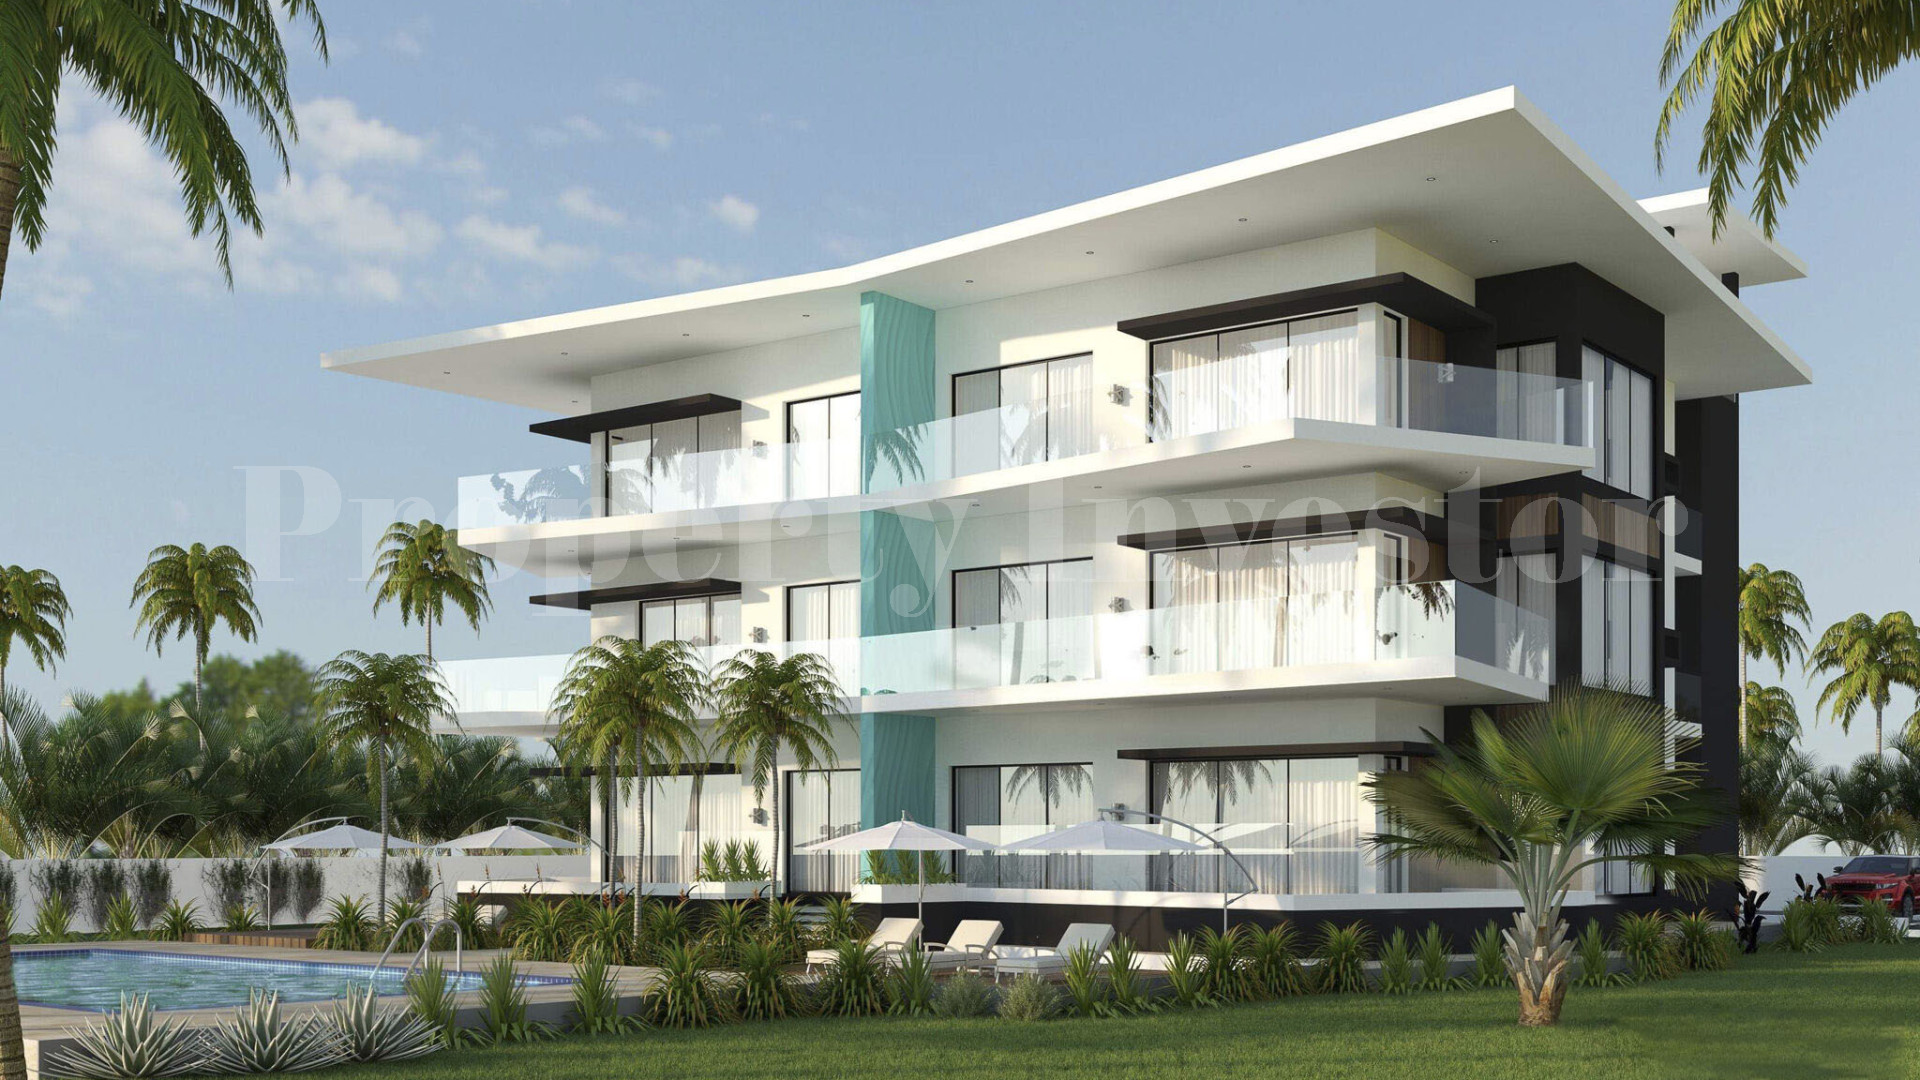 Exclusive Off-Plan Apartment Building Project for Sale in Grand Cayman, Cayman Islands